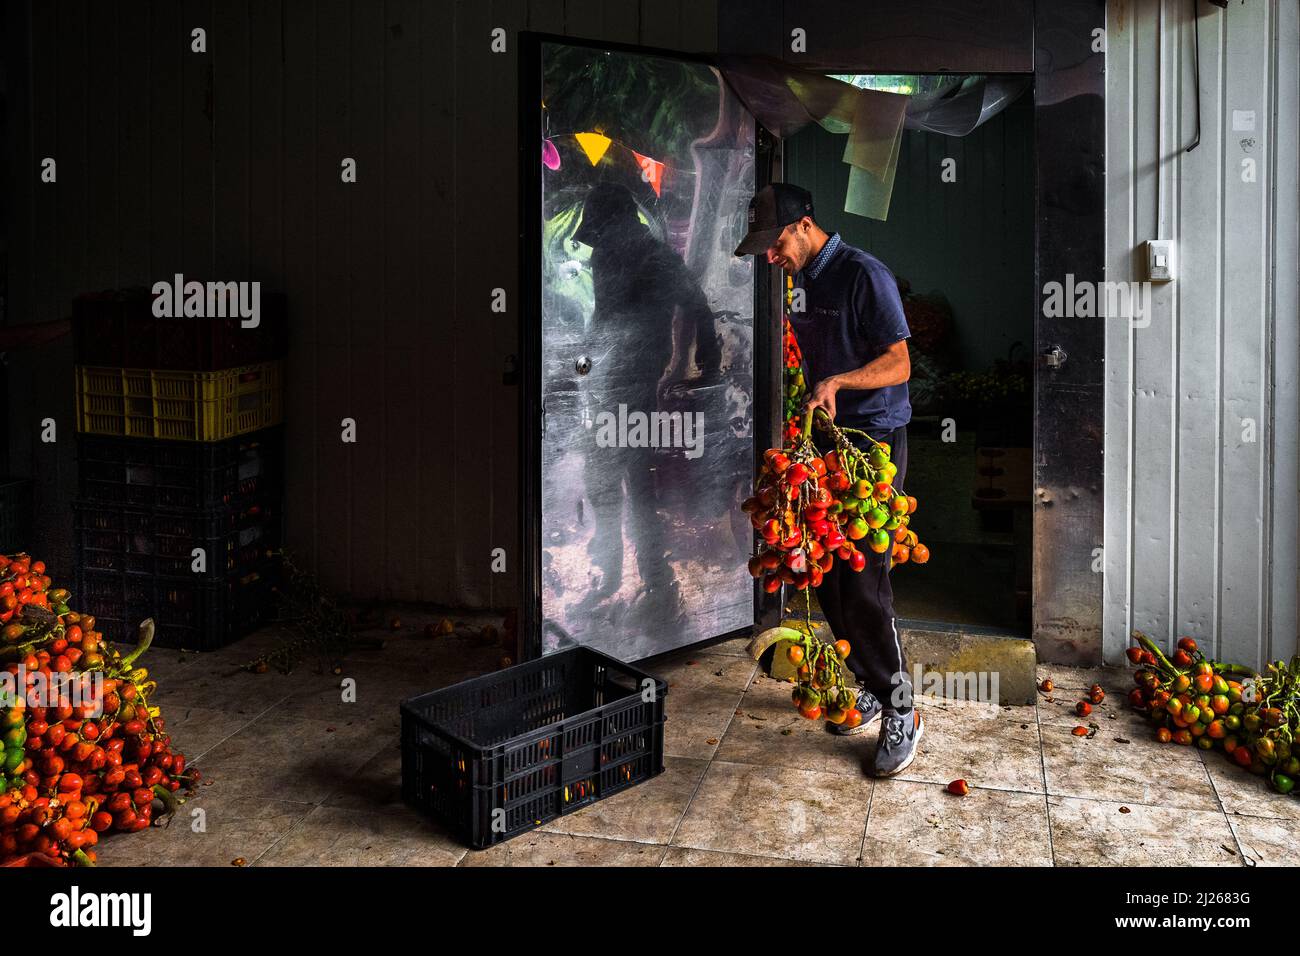 A Colombian man carries a bunch of chontaduro (peach palm) fruits from a freezer room in a processing facility in Cali, Valle del Cauca, Colombia. Stock Photo